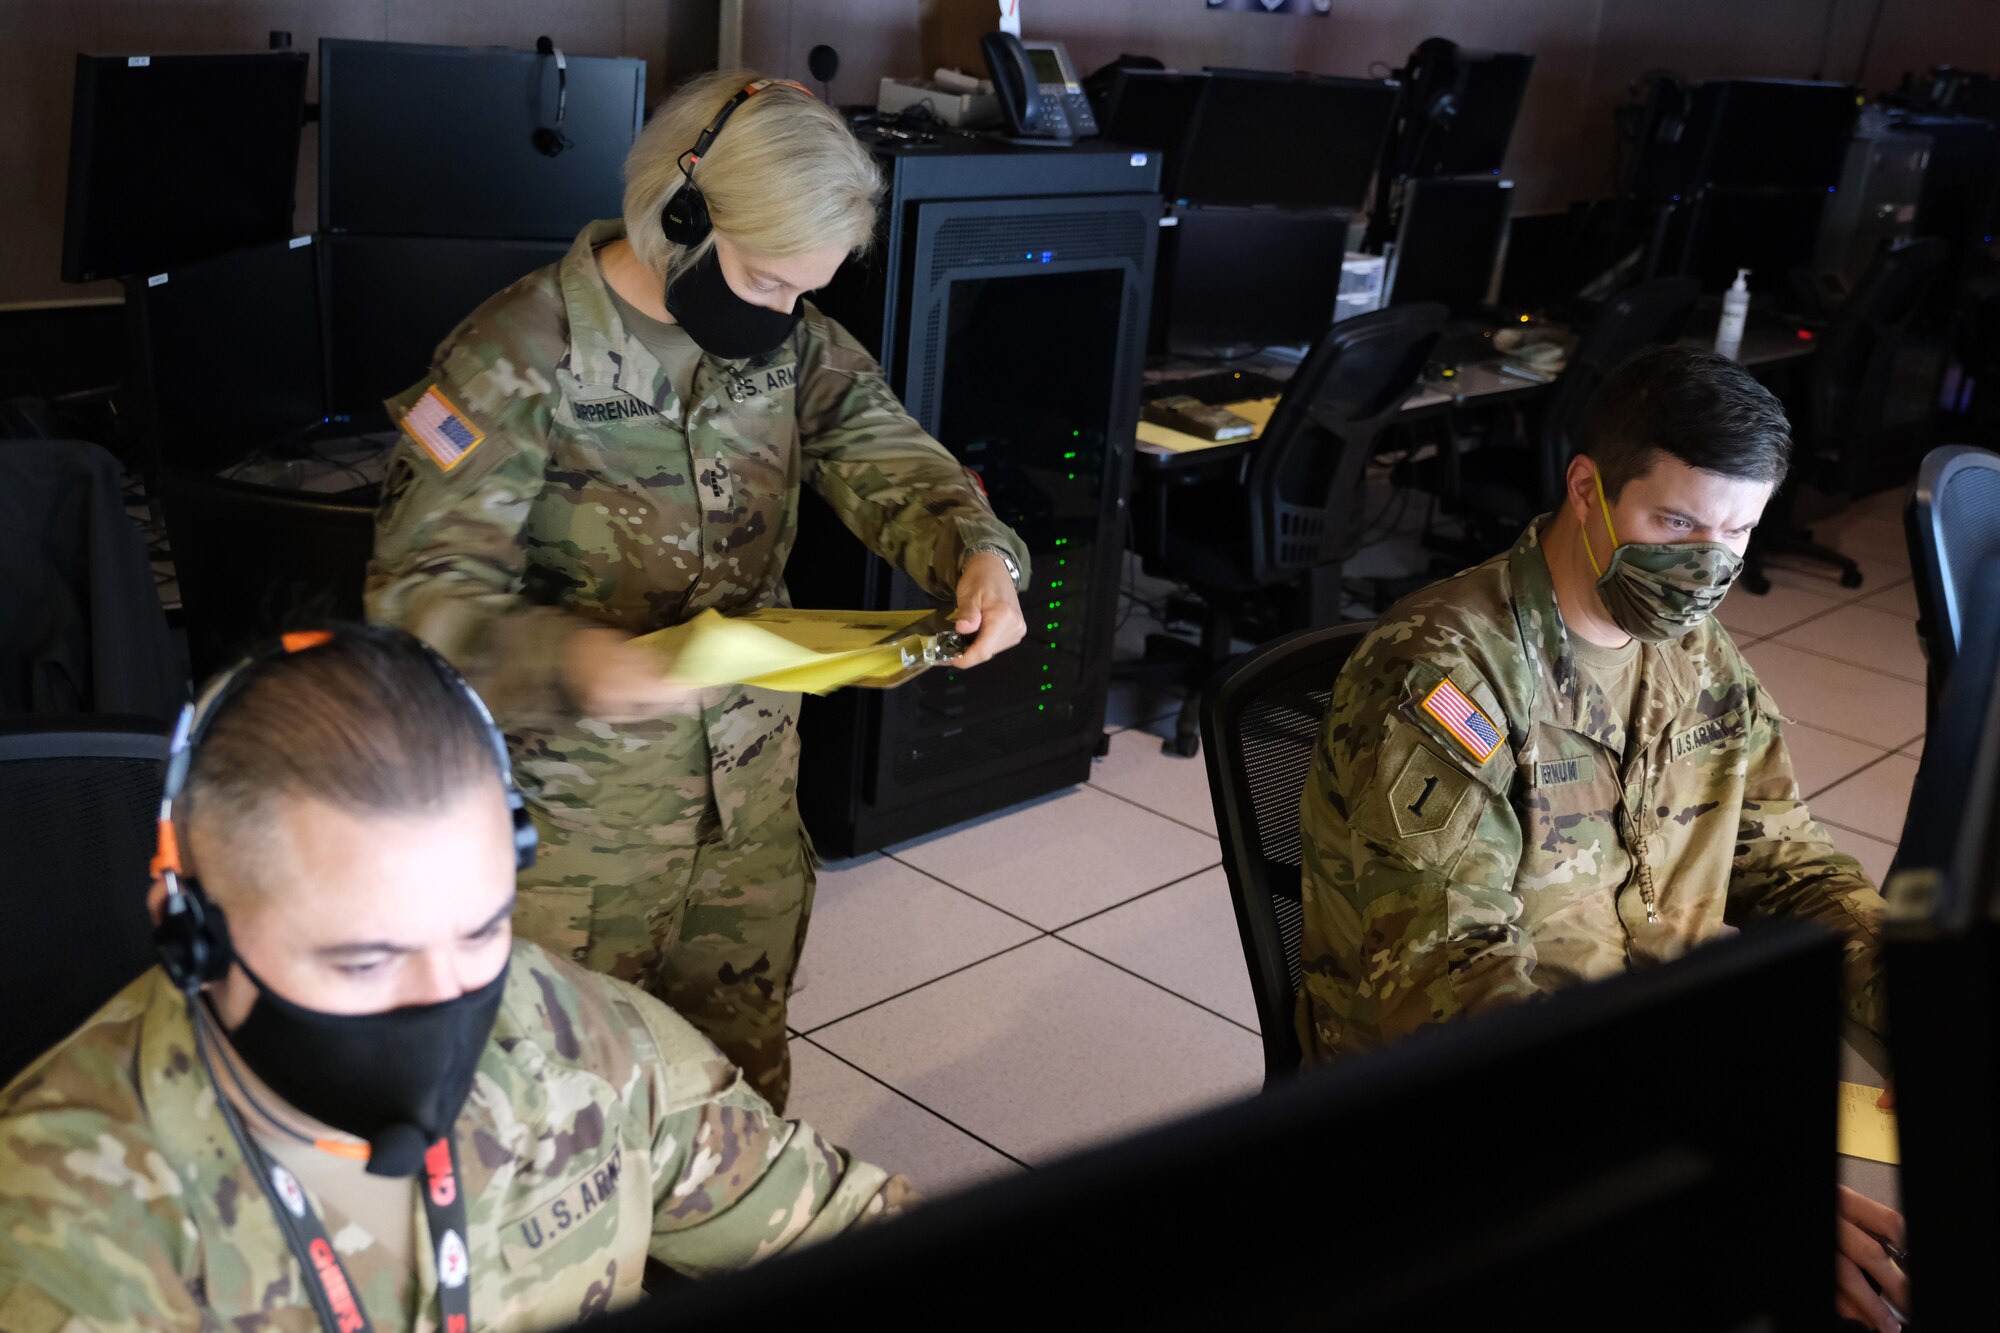 Two U.S. Army personnel sitting at computers and one female U.S. Army warrant officer standing behind them.